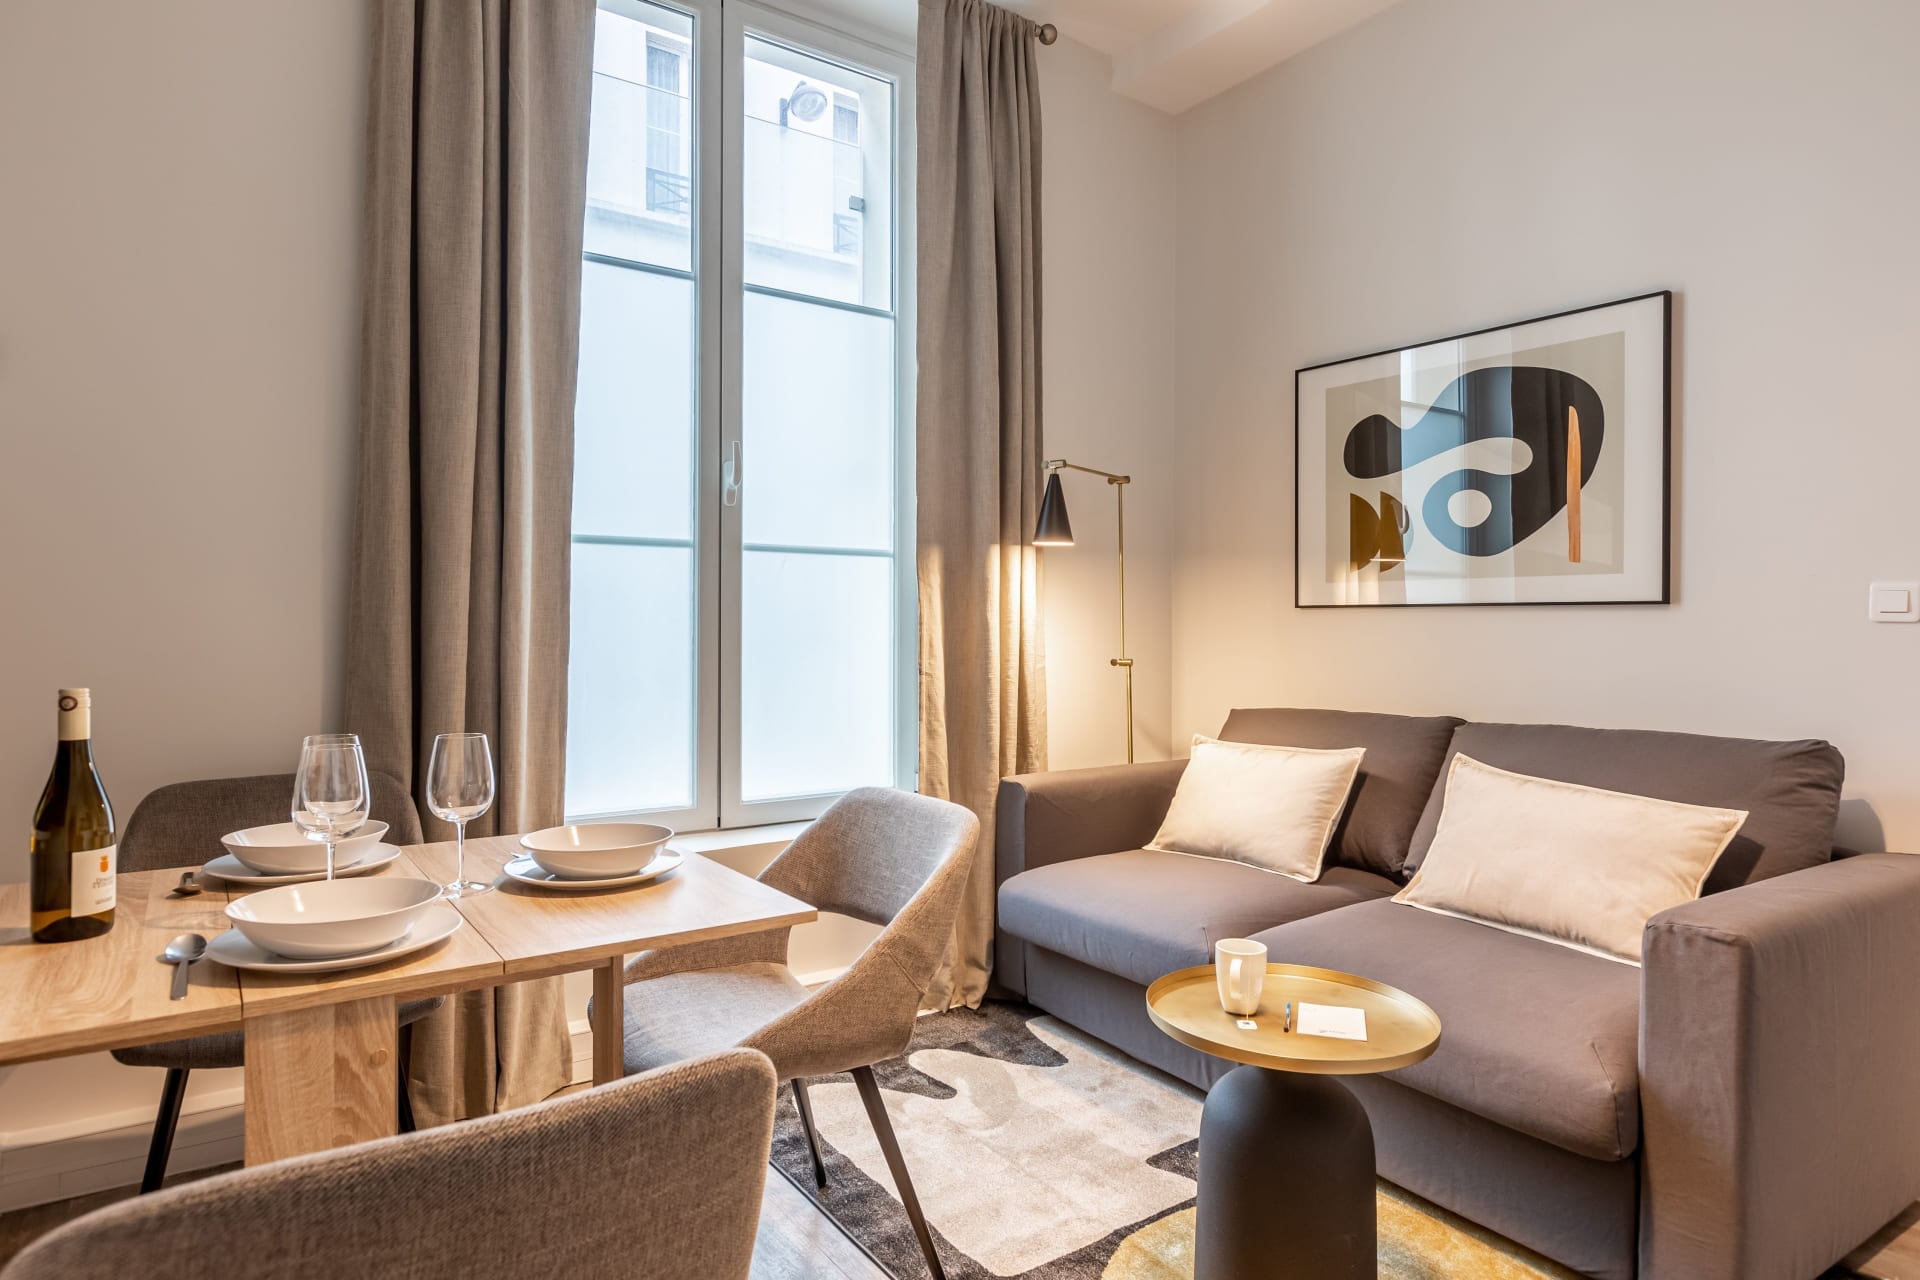 Property Image 2 - Chic two bedroom apartment in lively paris neighborhood